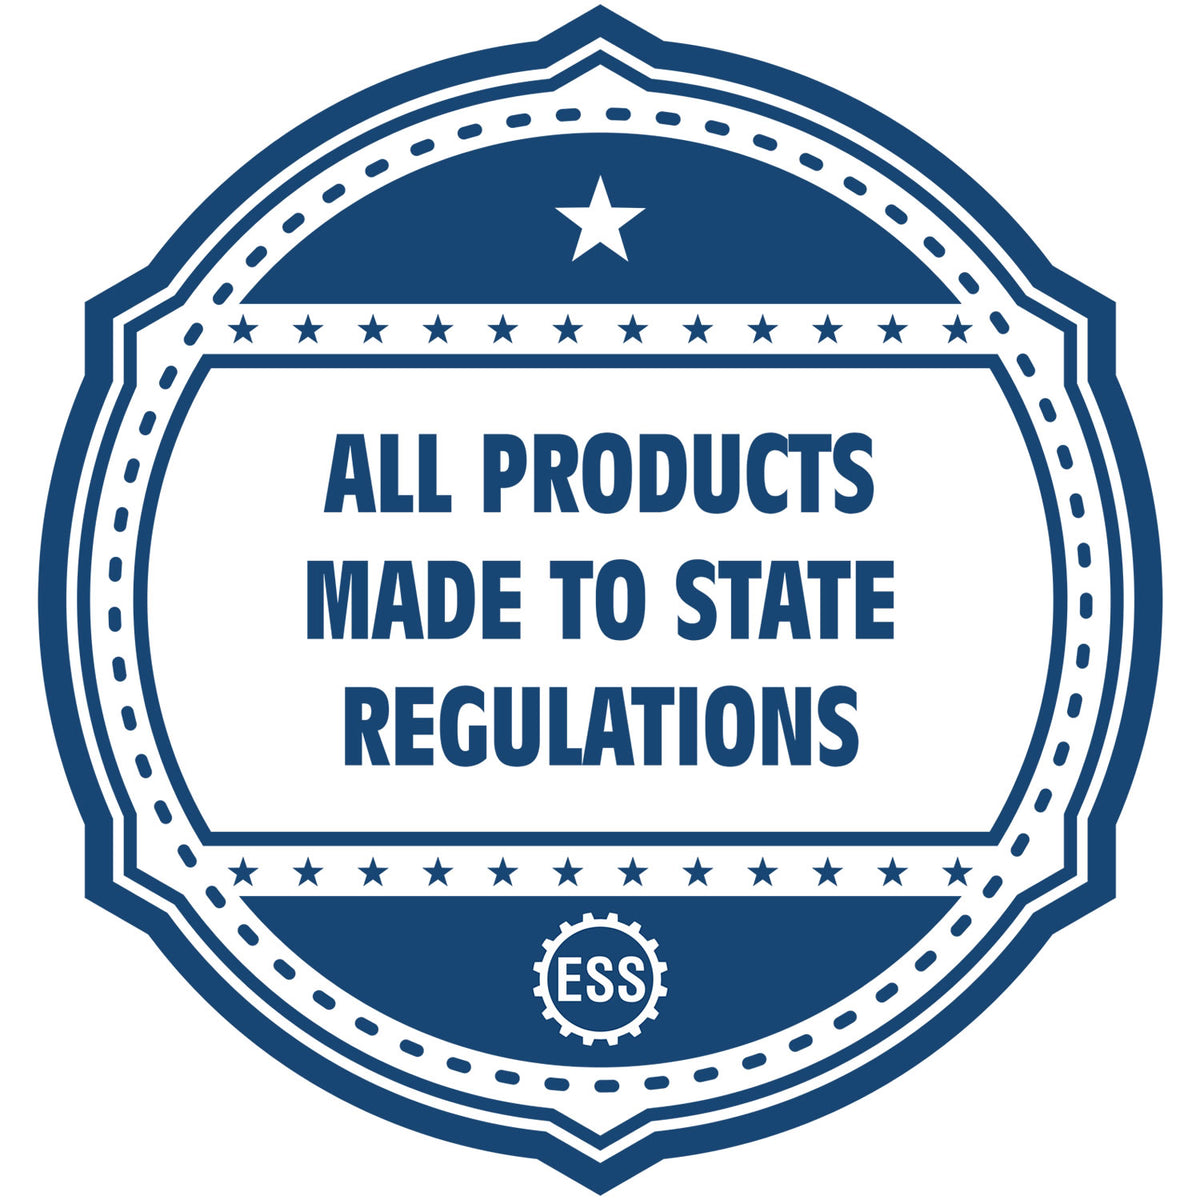 An icon or badge element for the PSI New Jersey Notary Stamp showing that this product is made in compliance with state regulations.